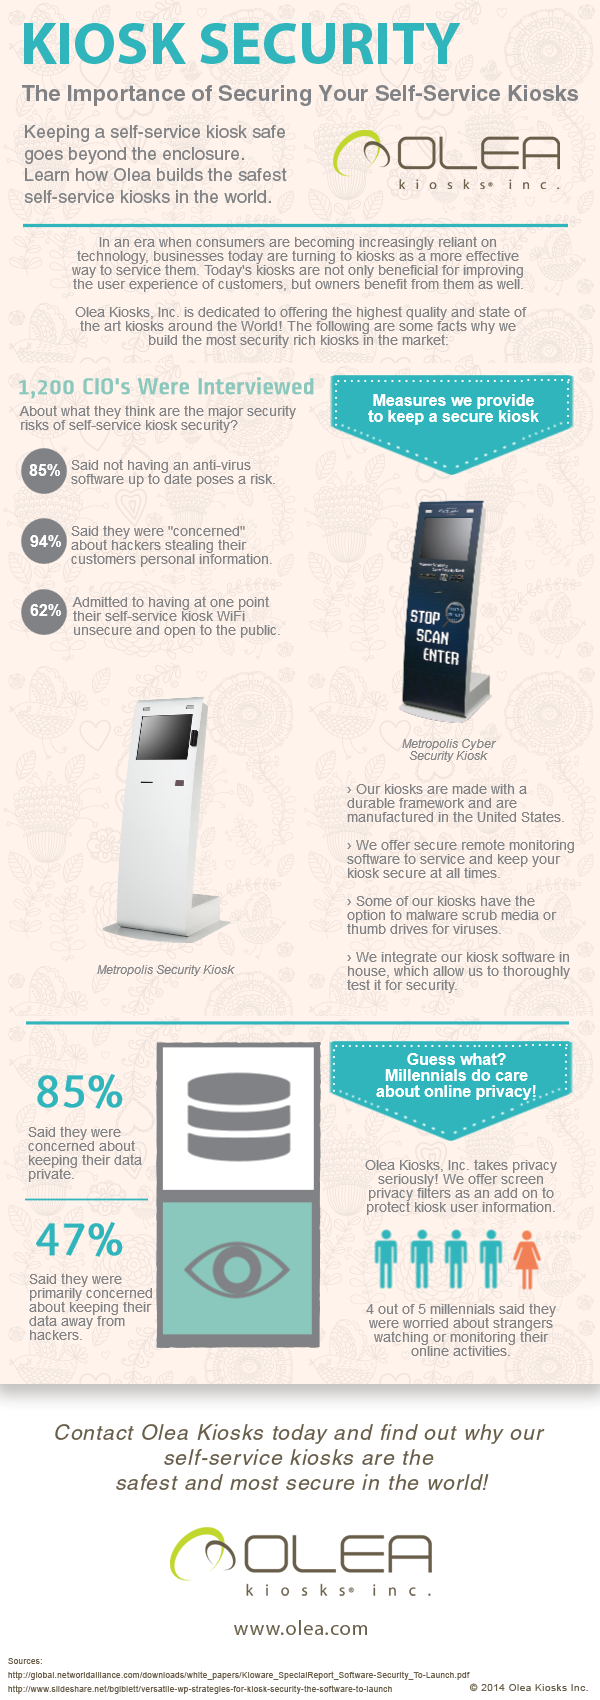 Kiosk Security: The Importante of Securing Your Self-Service Kiosks (Infographic)